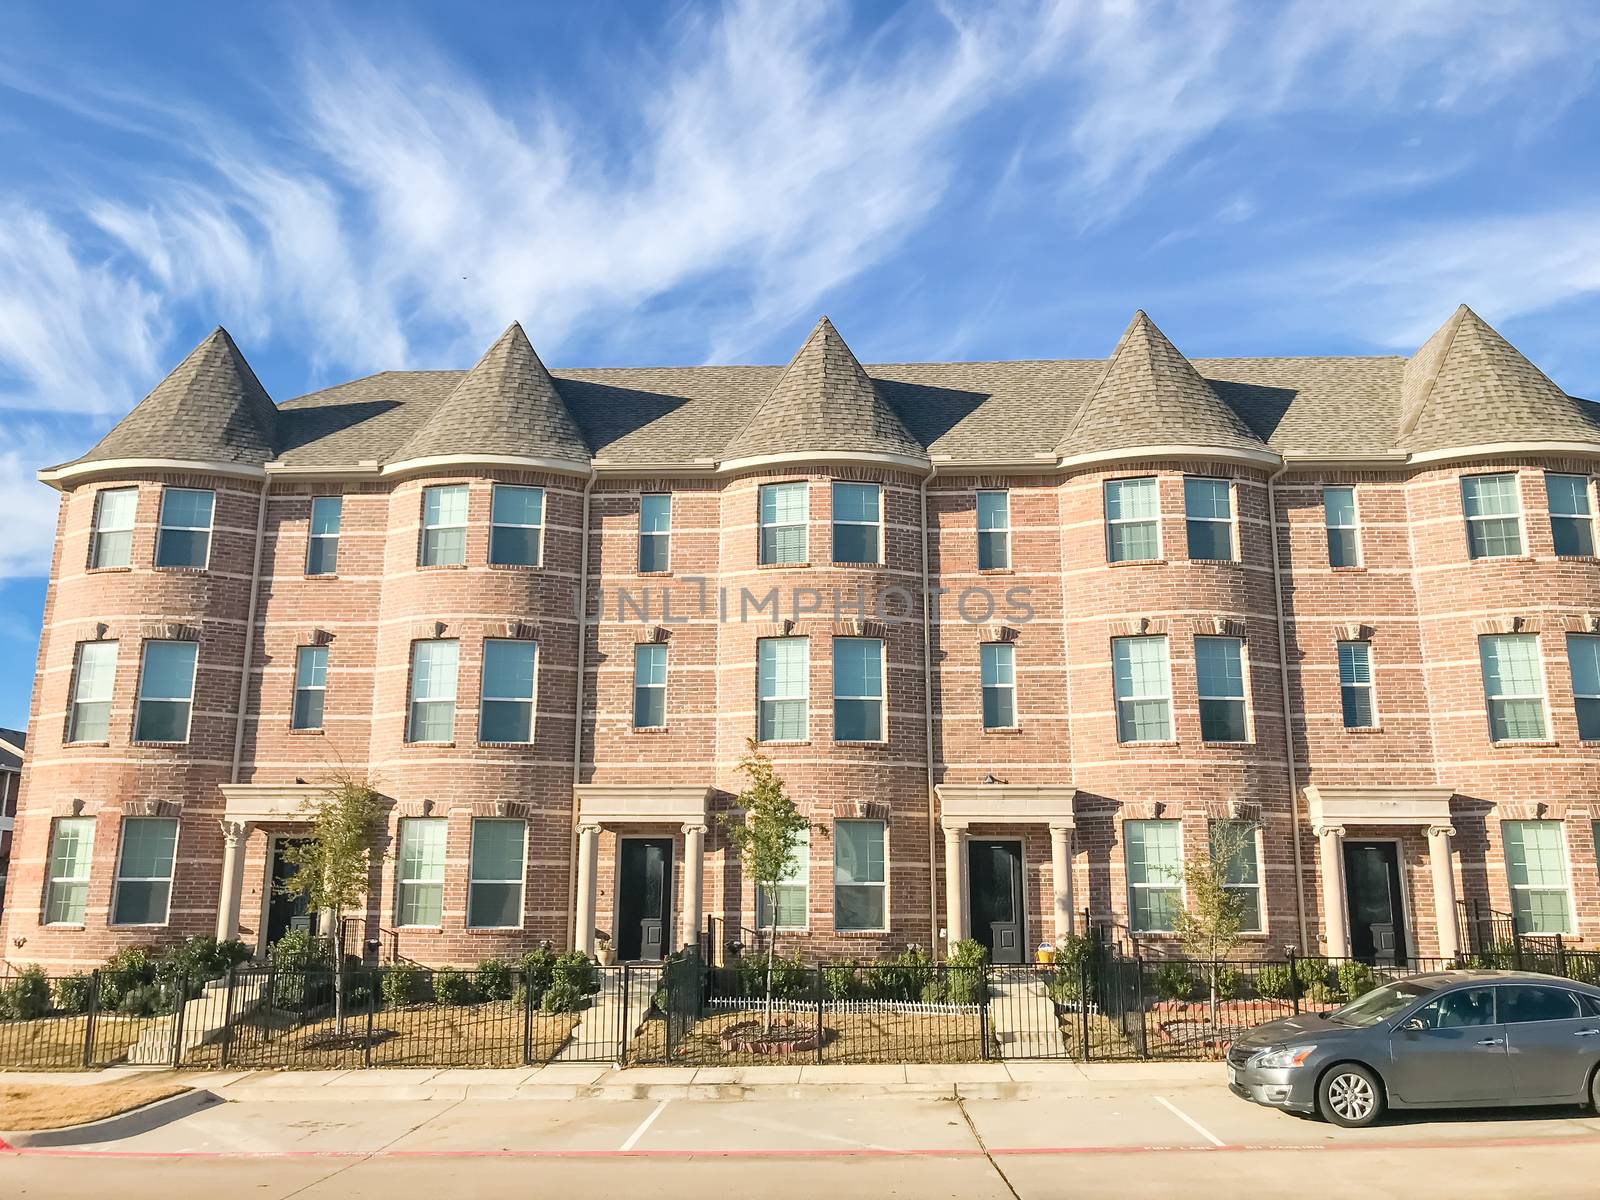 New townhome apartment complex with cars park on street near Dallas, Texas, USA